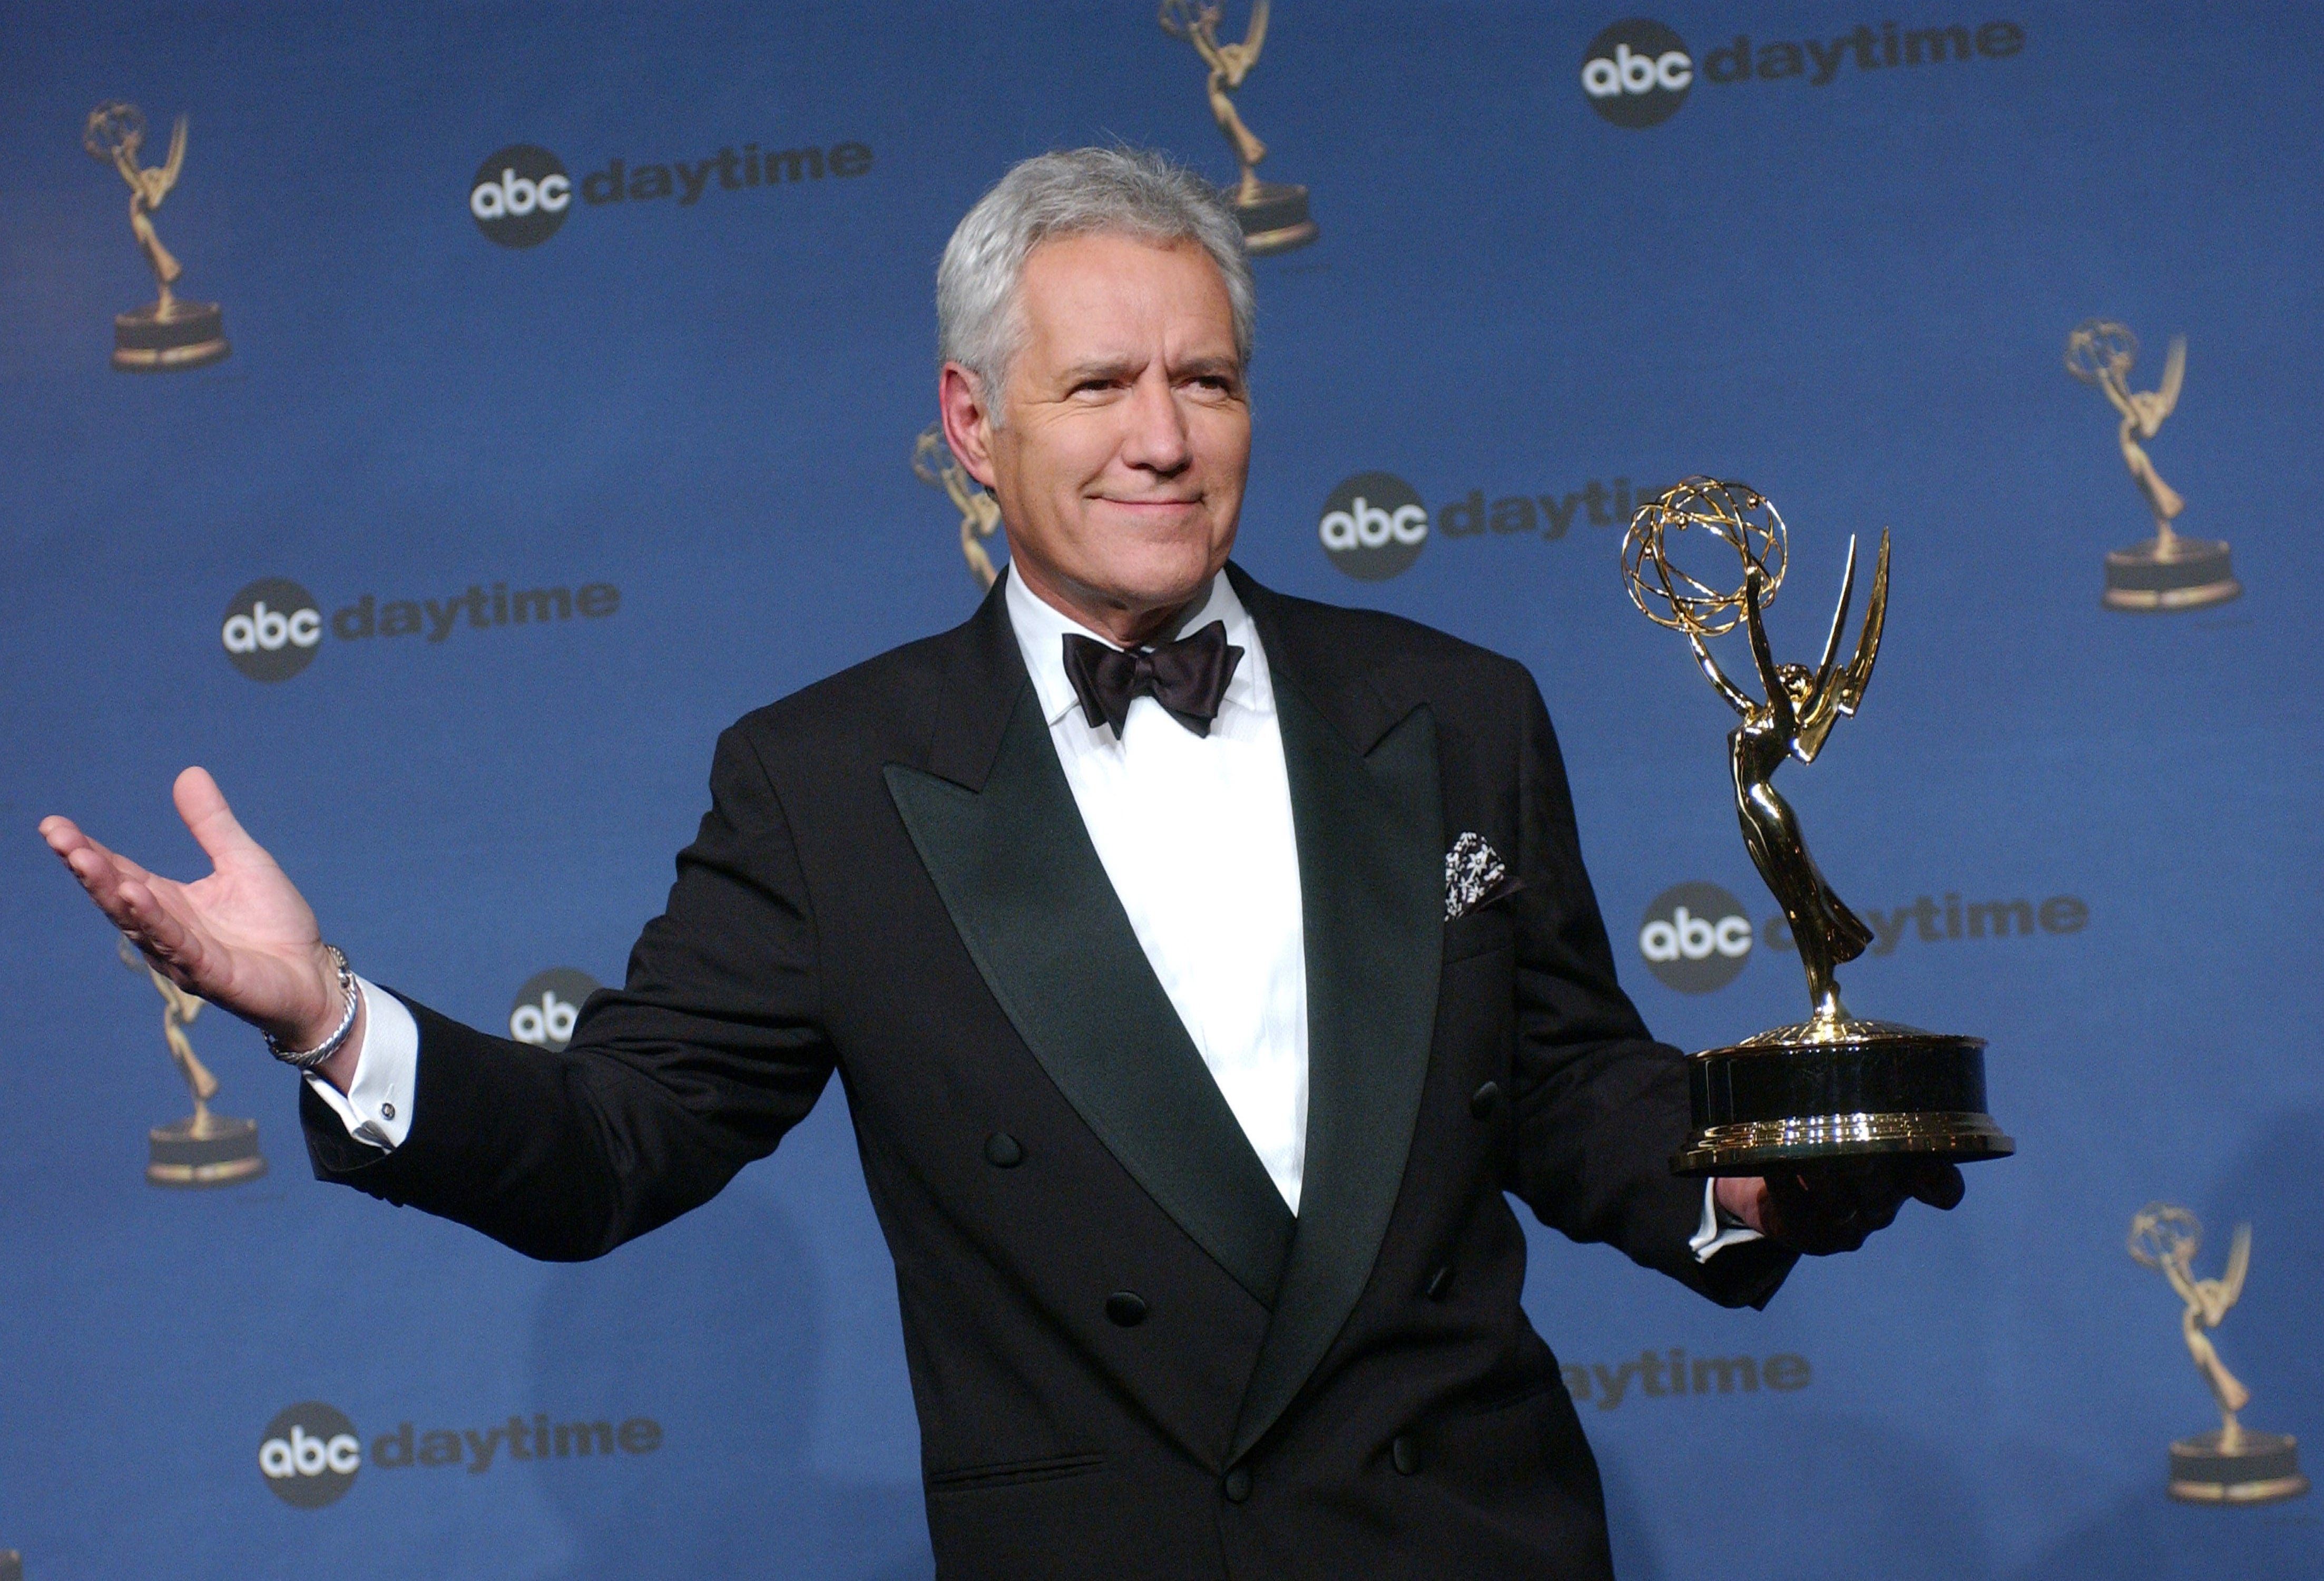 On this day in history, March 6, 2019, Alex Trebek shares cancer diagnosis with the world